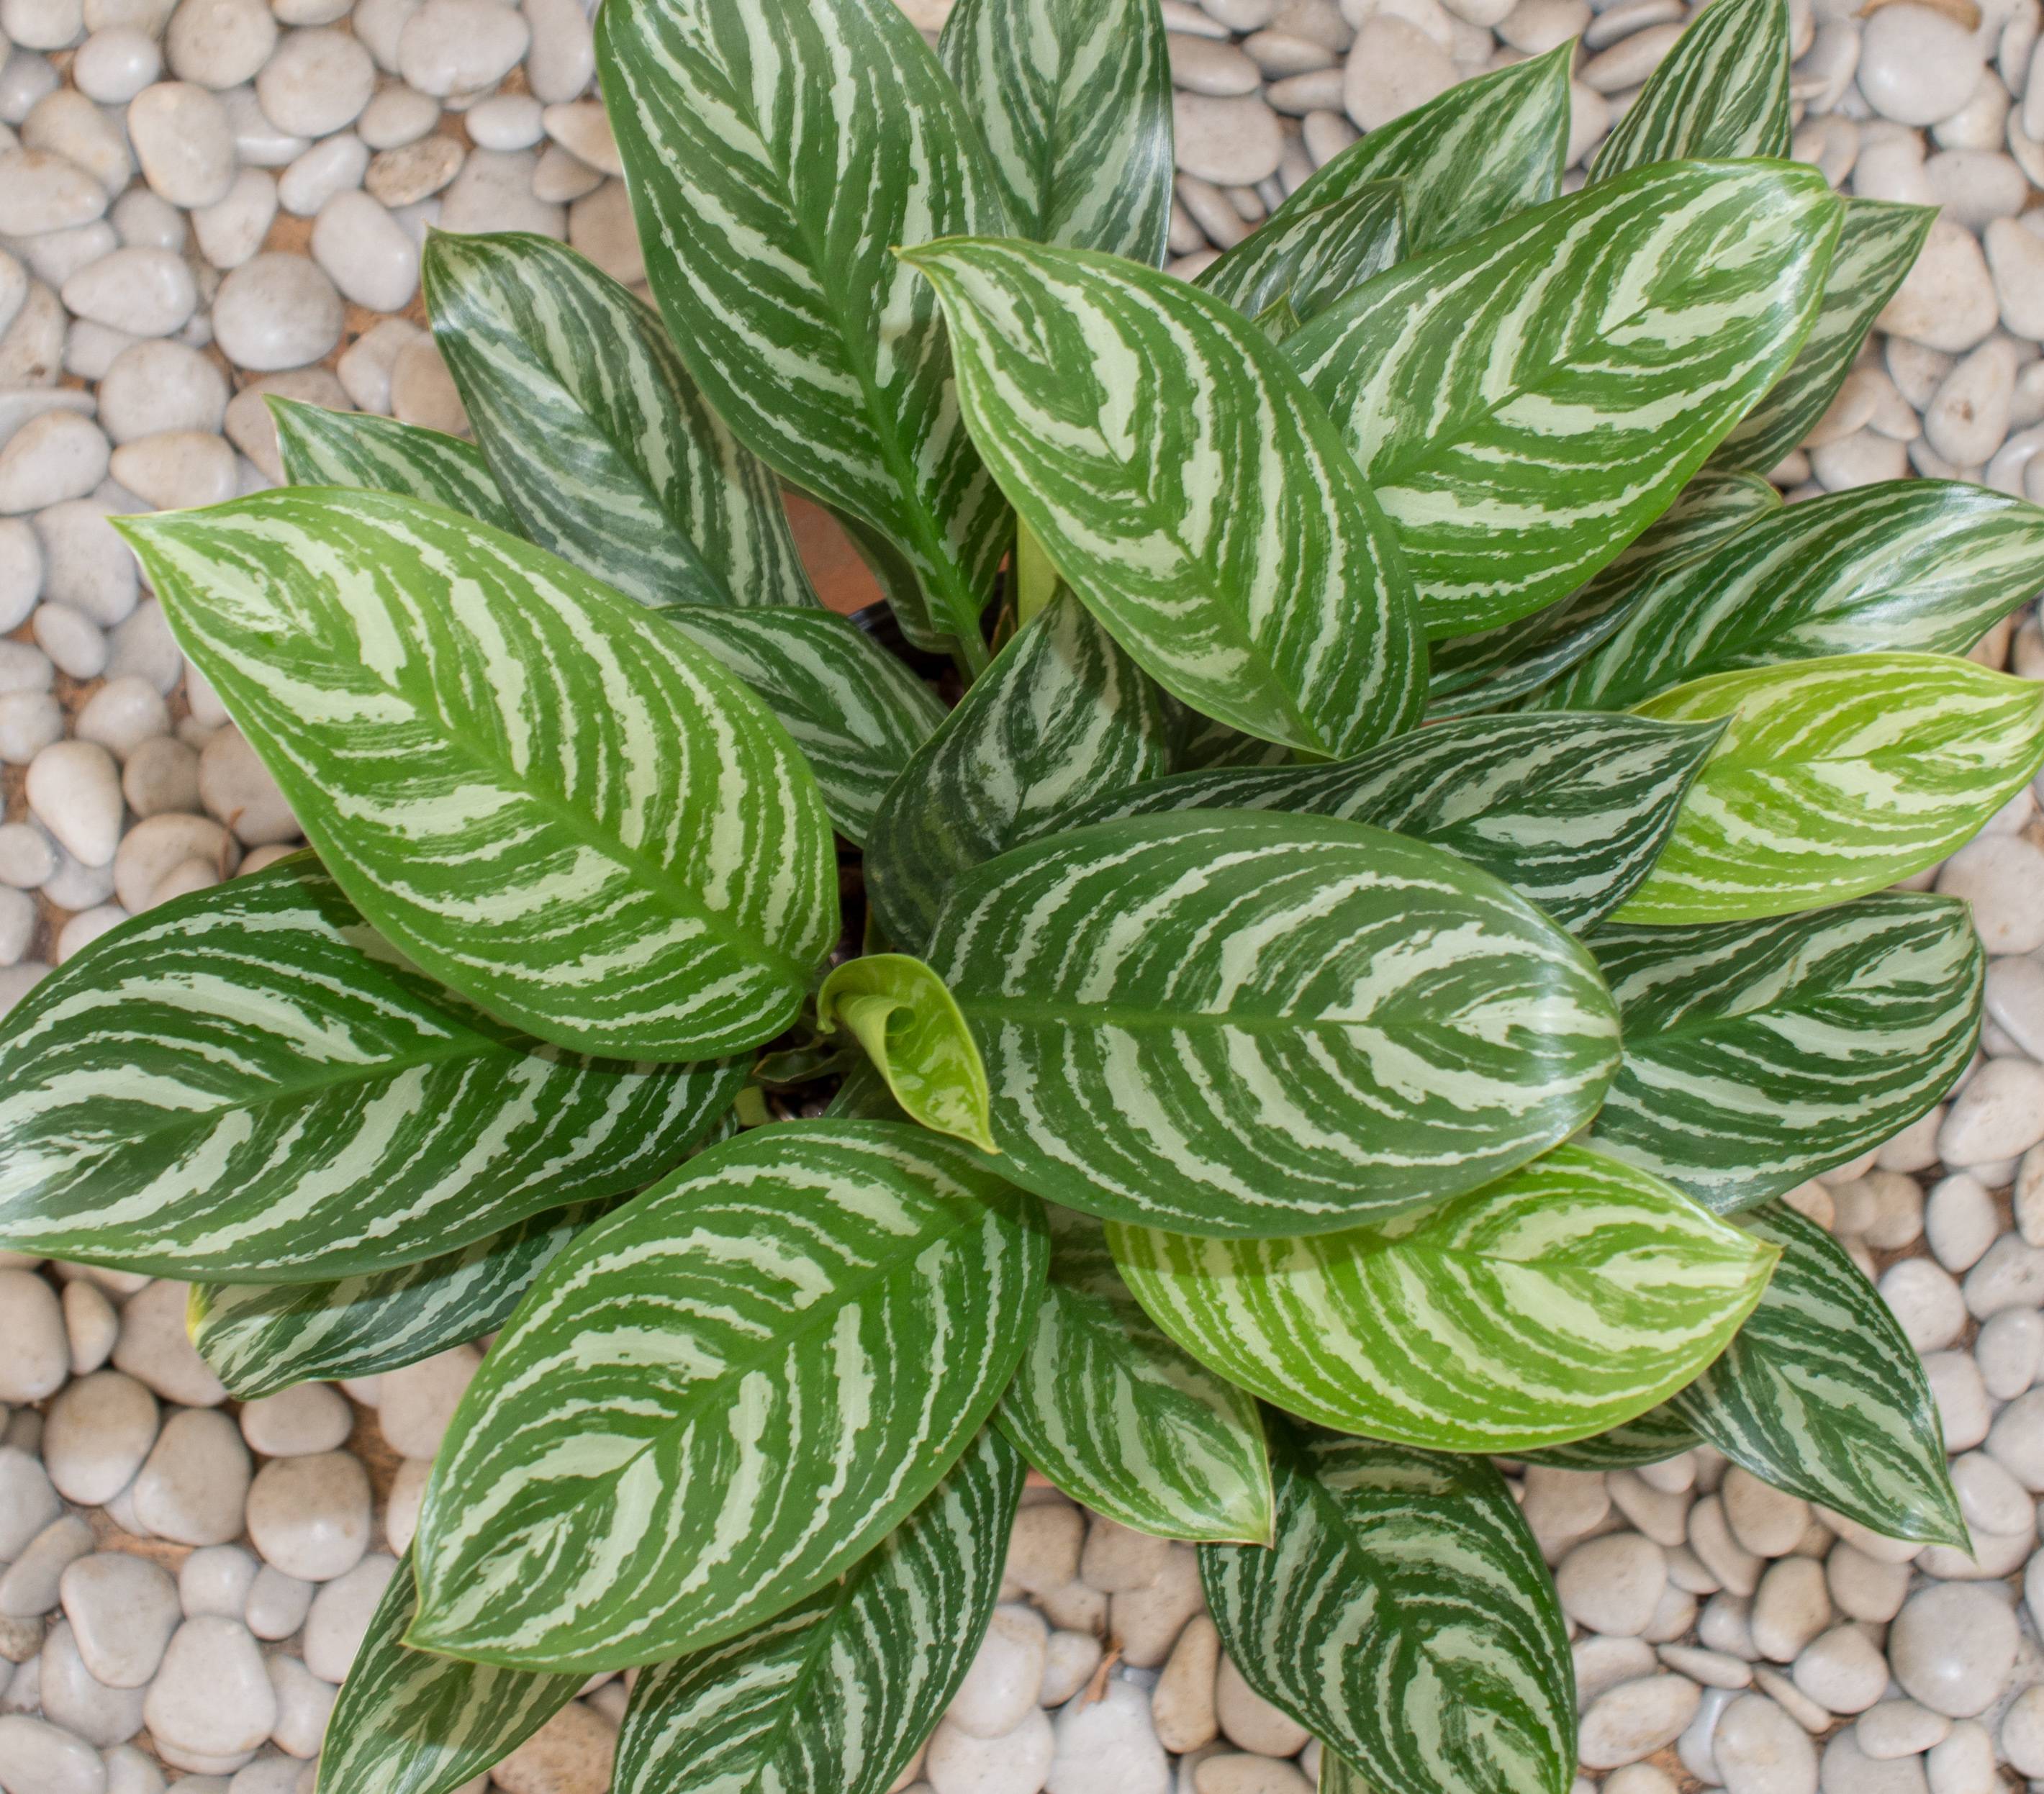 Anglaonema For Sale Online Now Quality Plants Delivered To Your Home,Pork Tenderloin Internal Temperature Uk